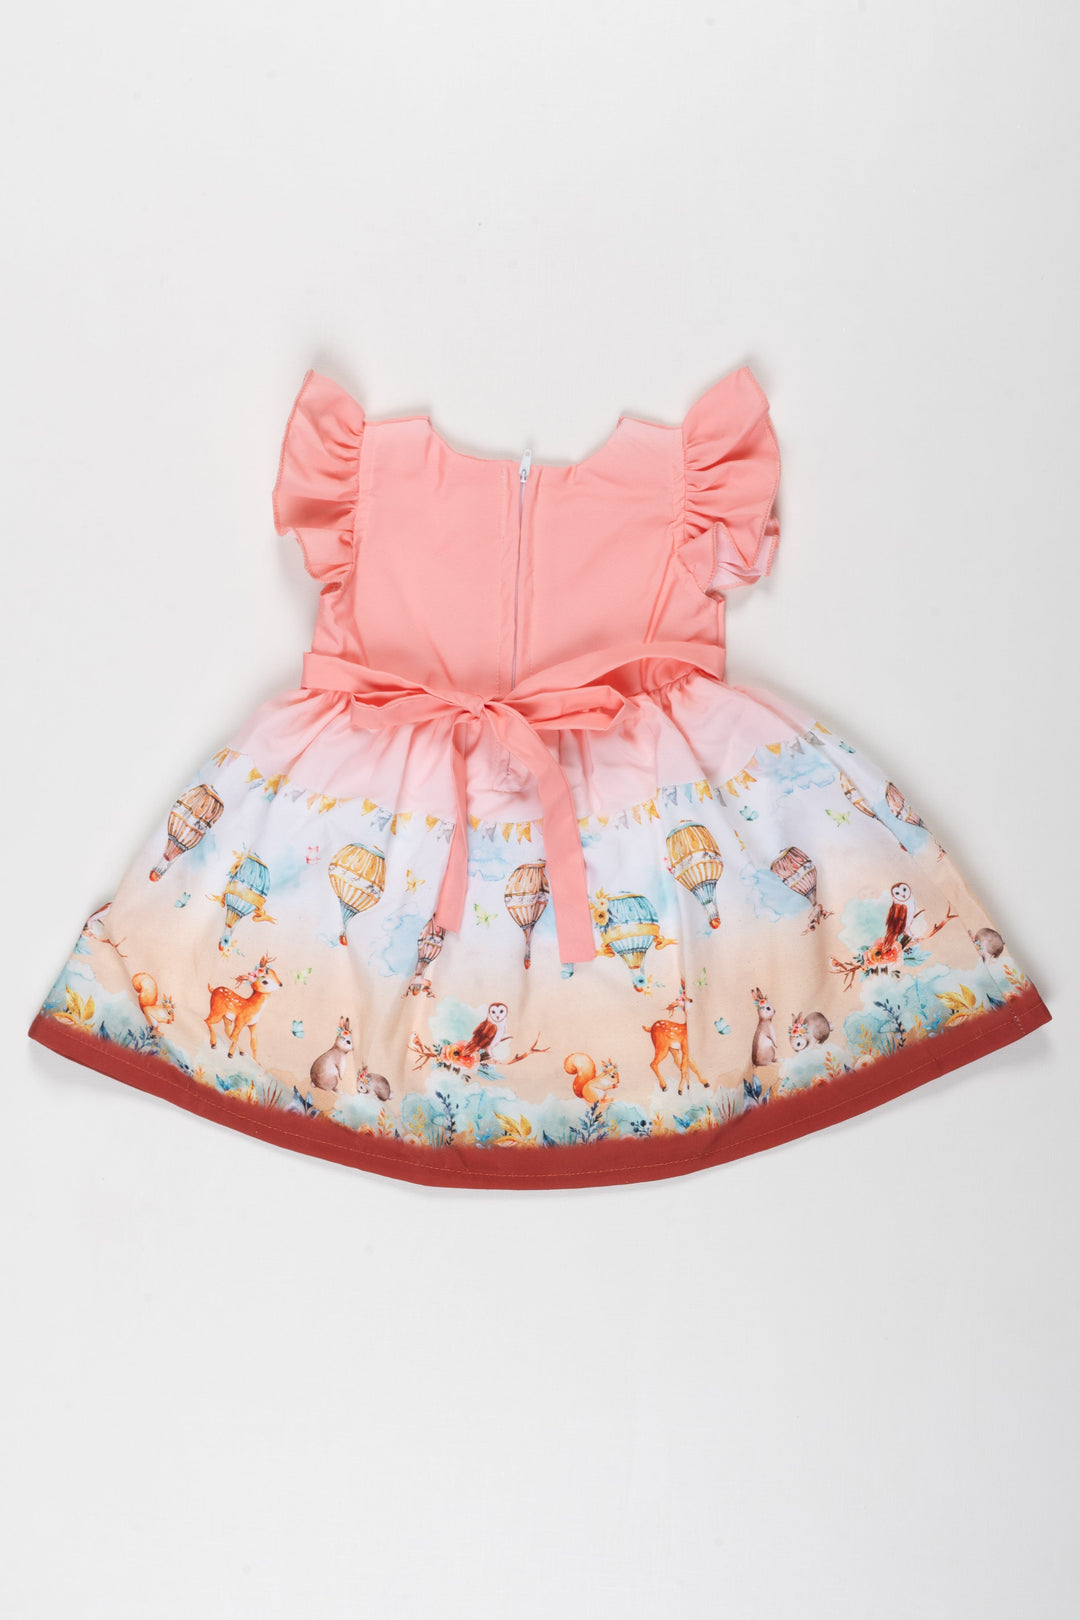 The Nesavu Baby Fancy Frock Enchanted Forest Adventure Baby Girl Frock with Hot Air Balloon Imagery Nesavu Discover the Magic of Storytime with Our Woodland Balloon Baby Frock | The Nesavu